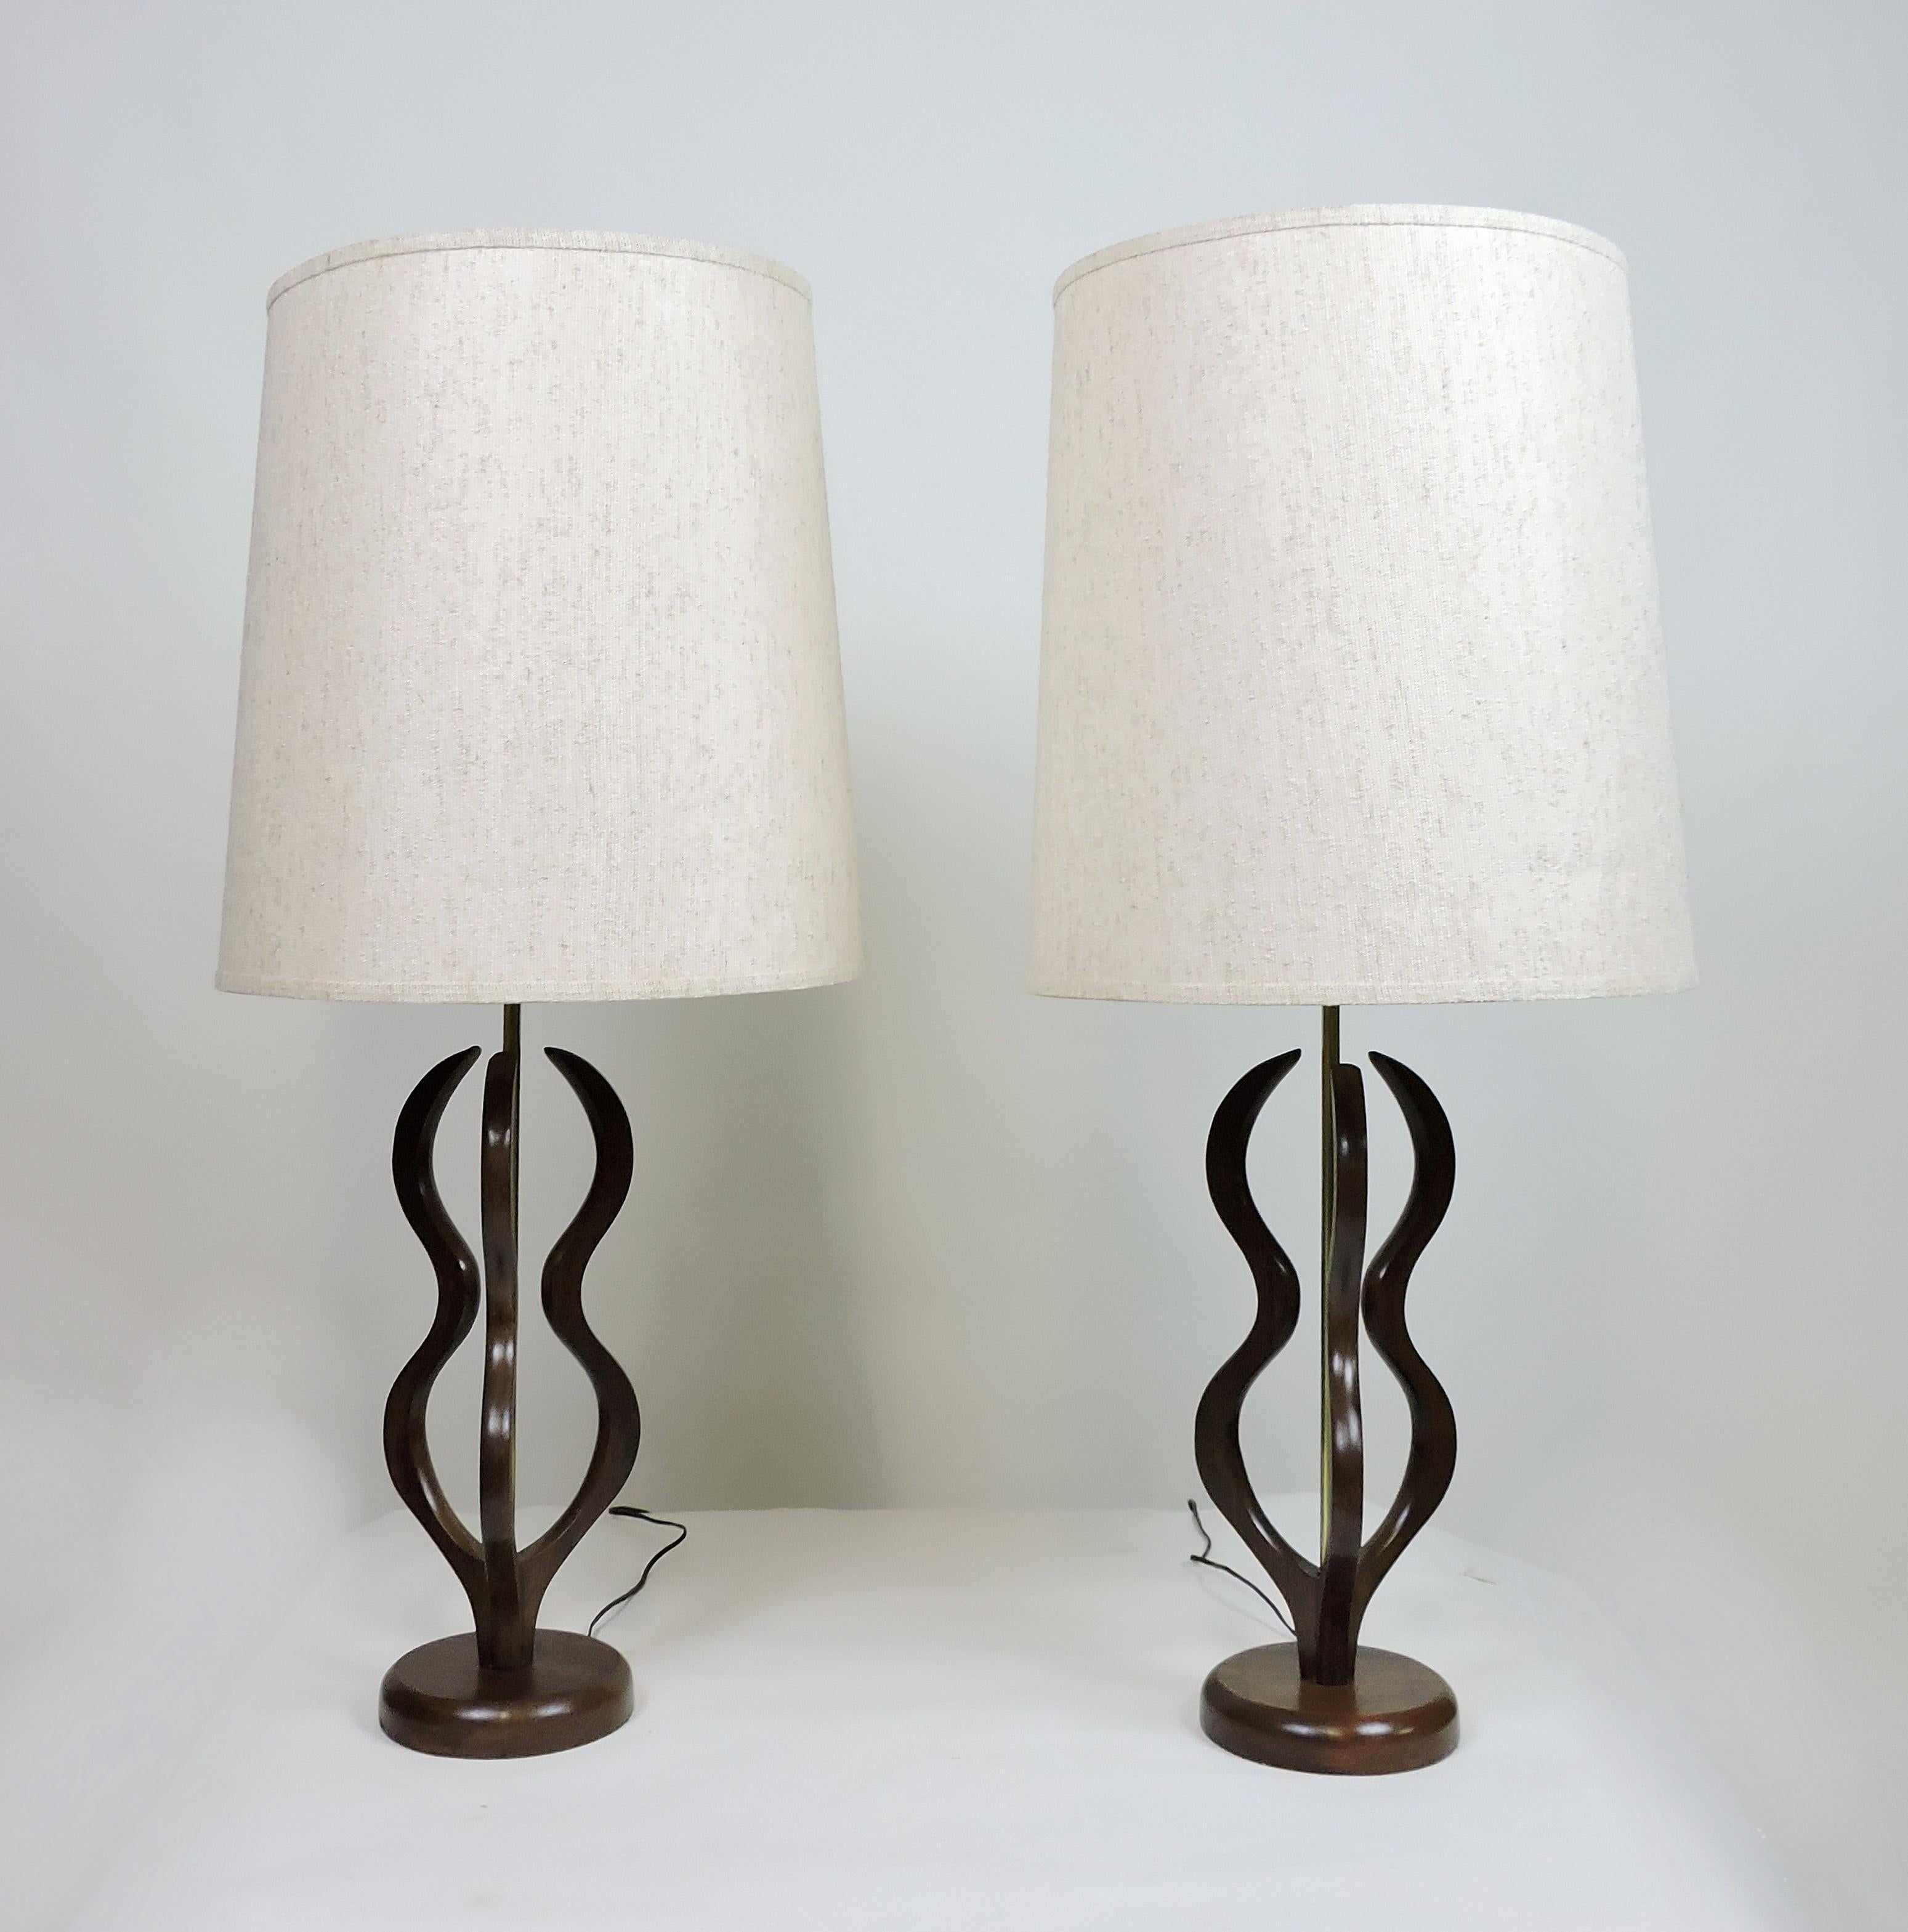 American Pair of Pearsall or Modeline Style Sculpted Walnut Mid-Century Modern Lamps